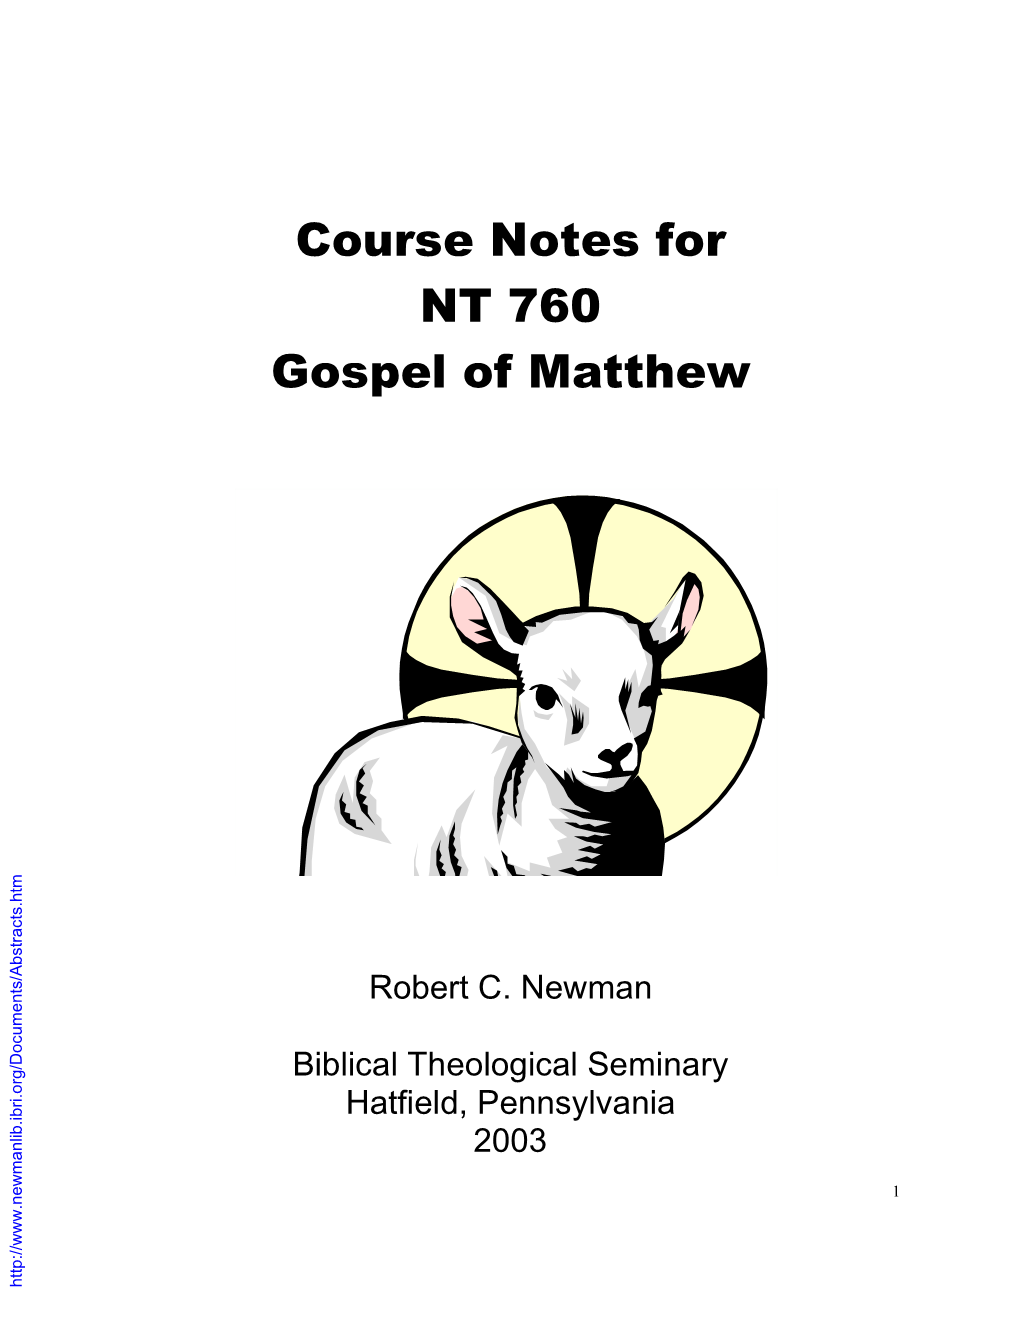 Course Notes for NT 760 Gospel of Matthew